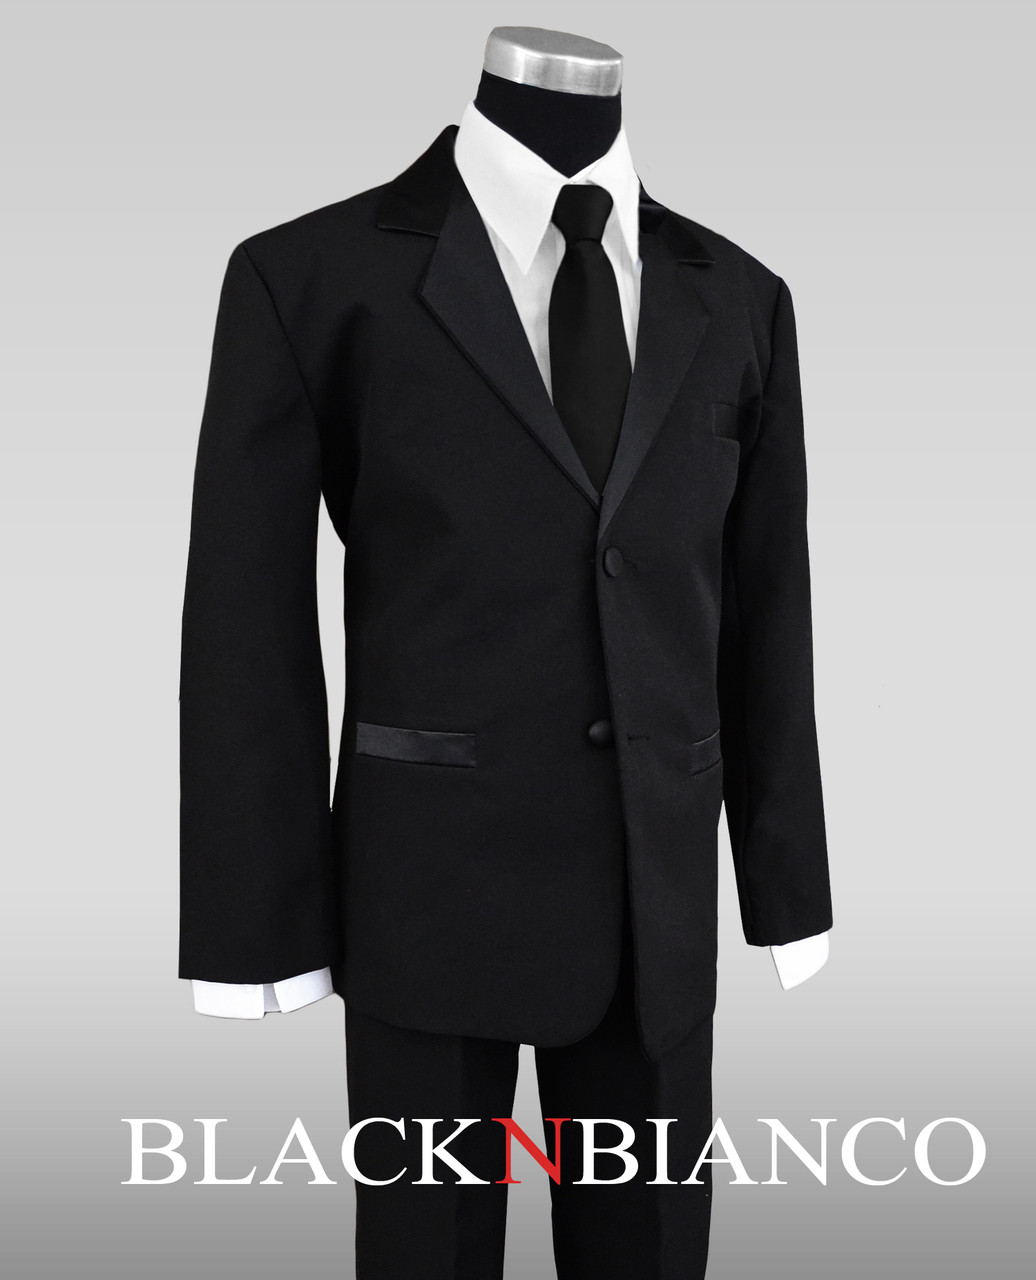 Formal Tuxedo Suit for Kids with Long Neck Tie in Black